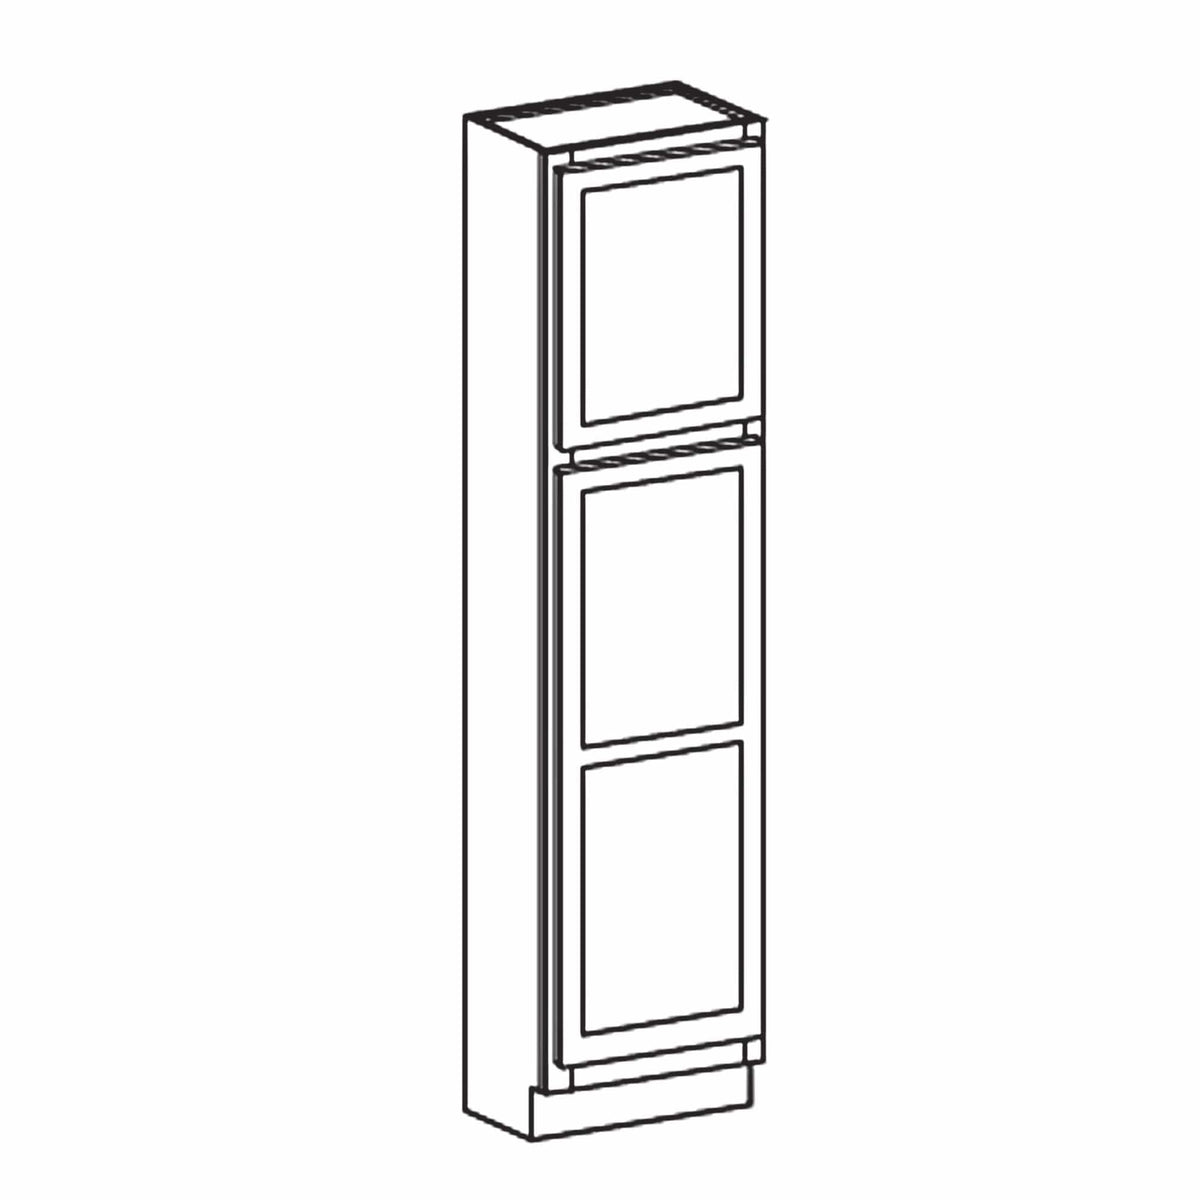 96" Tall Pantry White Shaker 1/2" Overlay Cabinet 18", 24" & 30" Wide